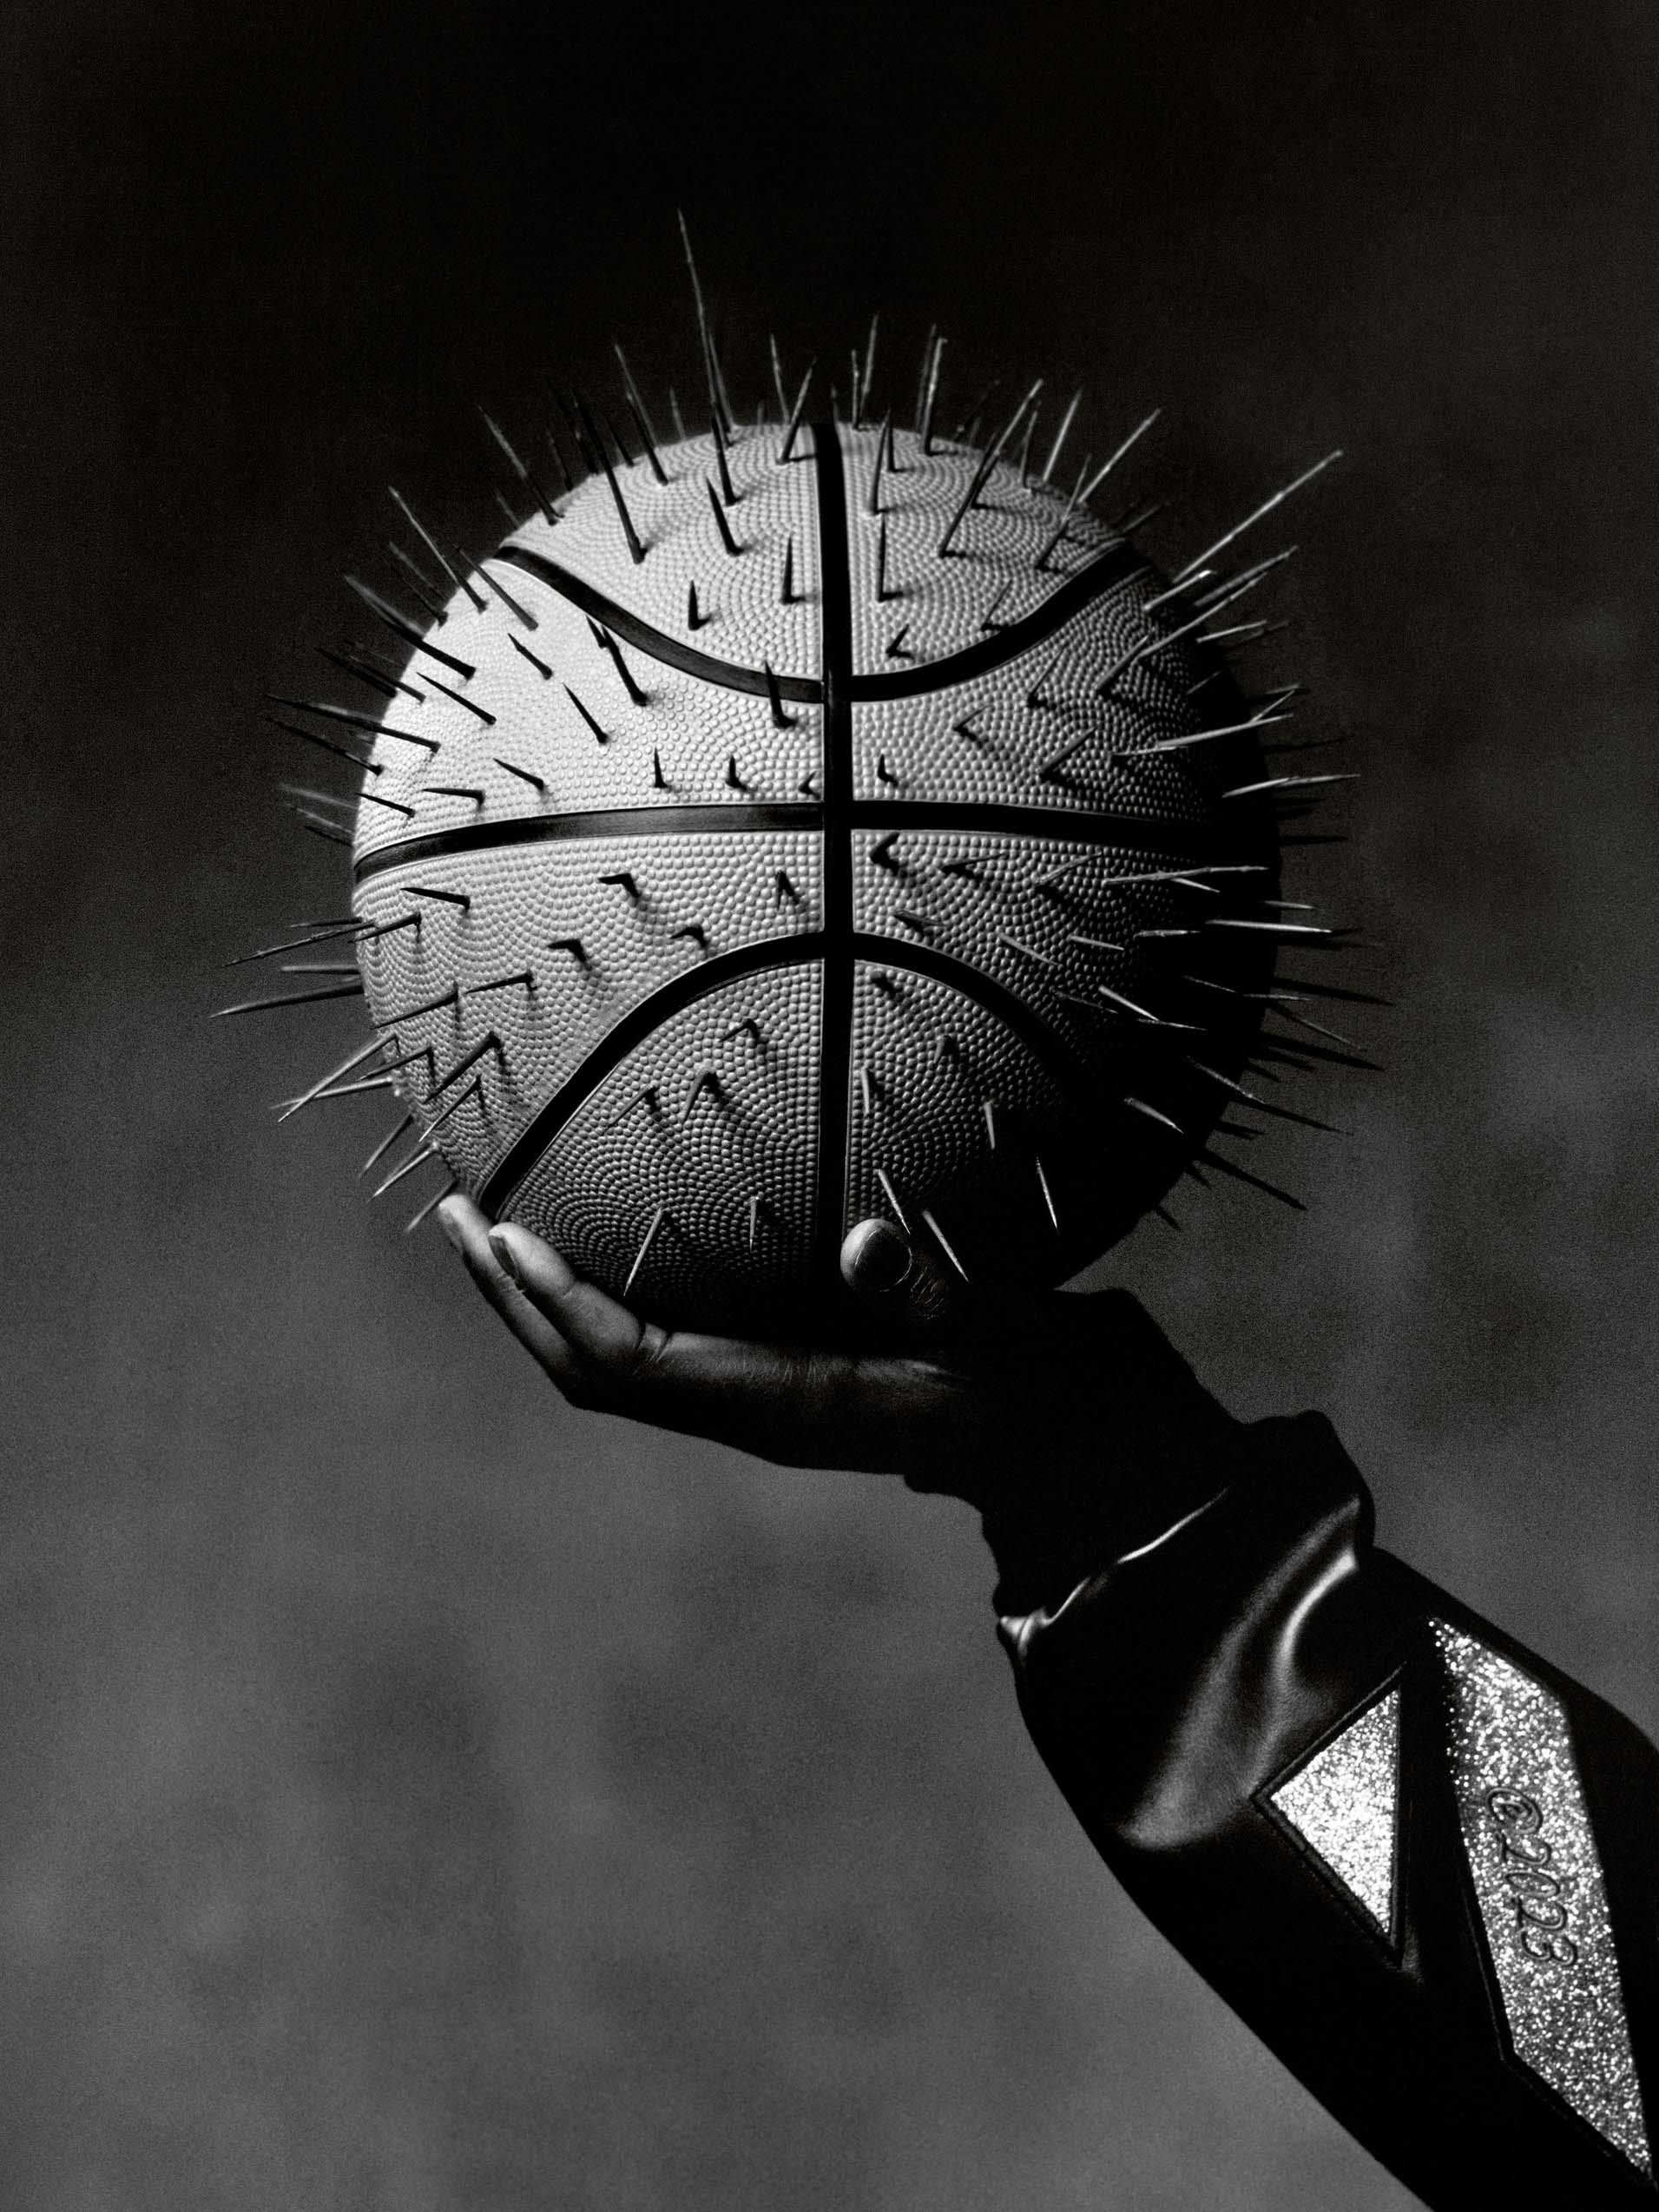 Spiked basketball is pictured